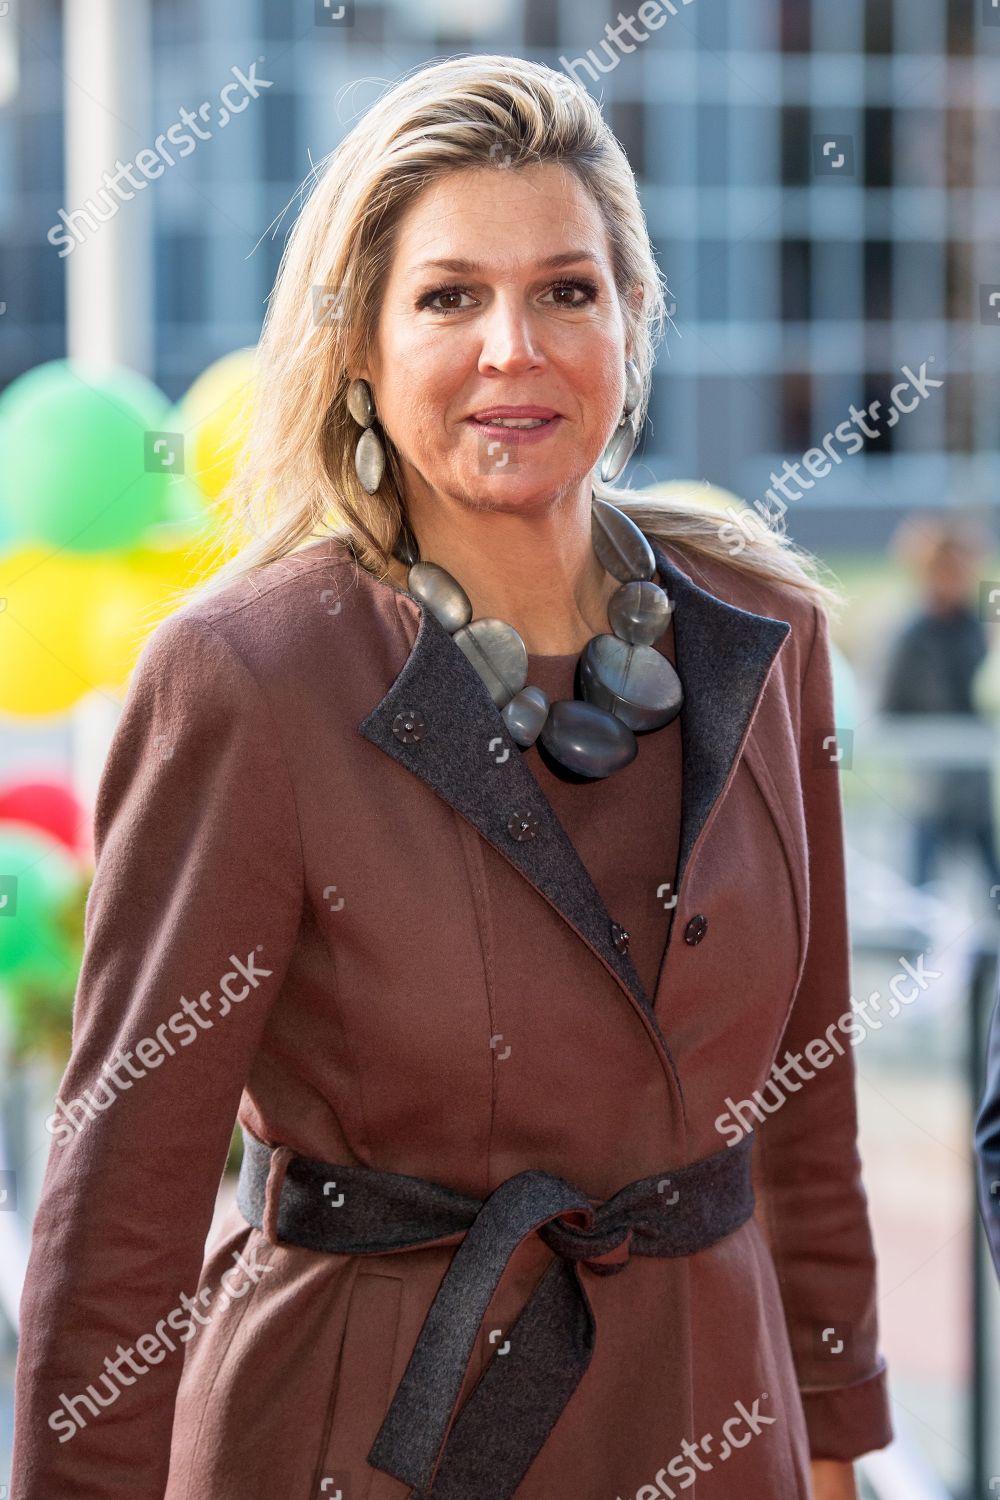 queen-maxima-visit-to-113-suicide-prevention-amsterdam-the-netherlands-shutterstock-editorial-9958871l.jpg